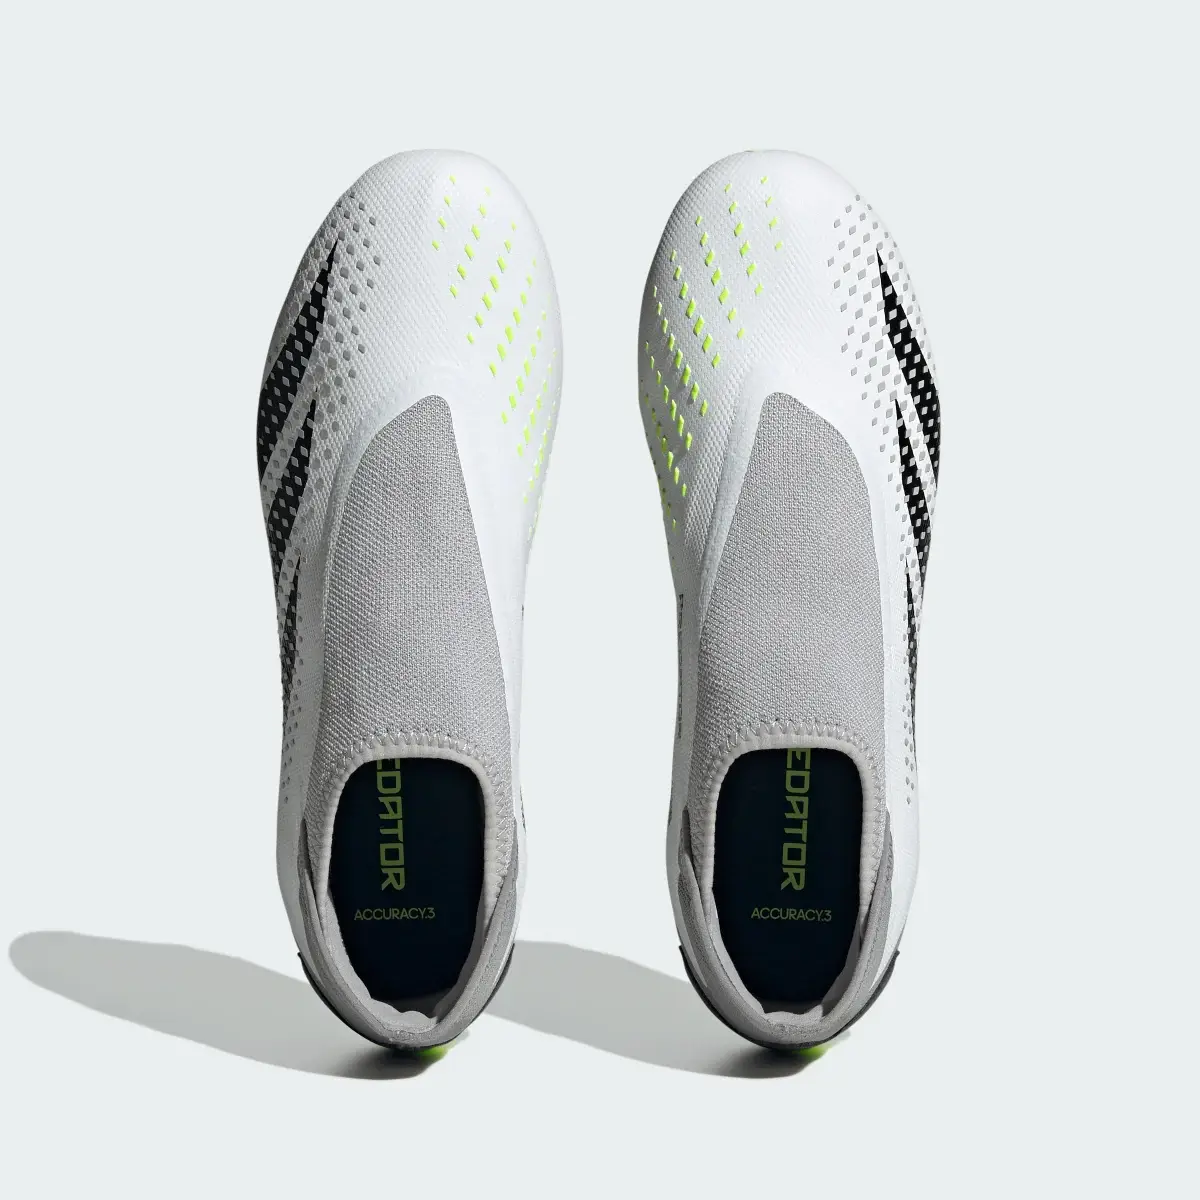 Adidas Predator Accuracy.3 Laceless Firm Ground Cleats. 3